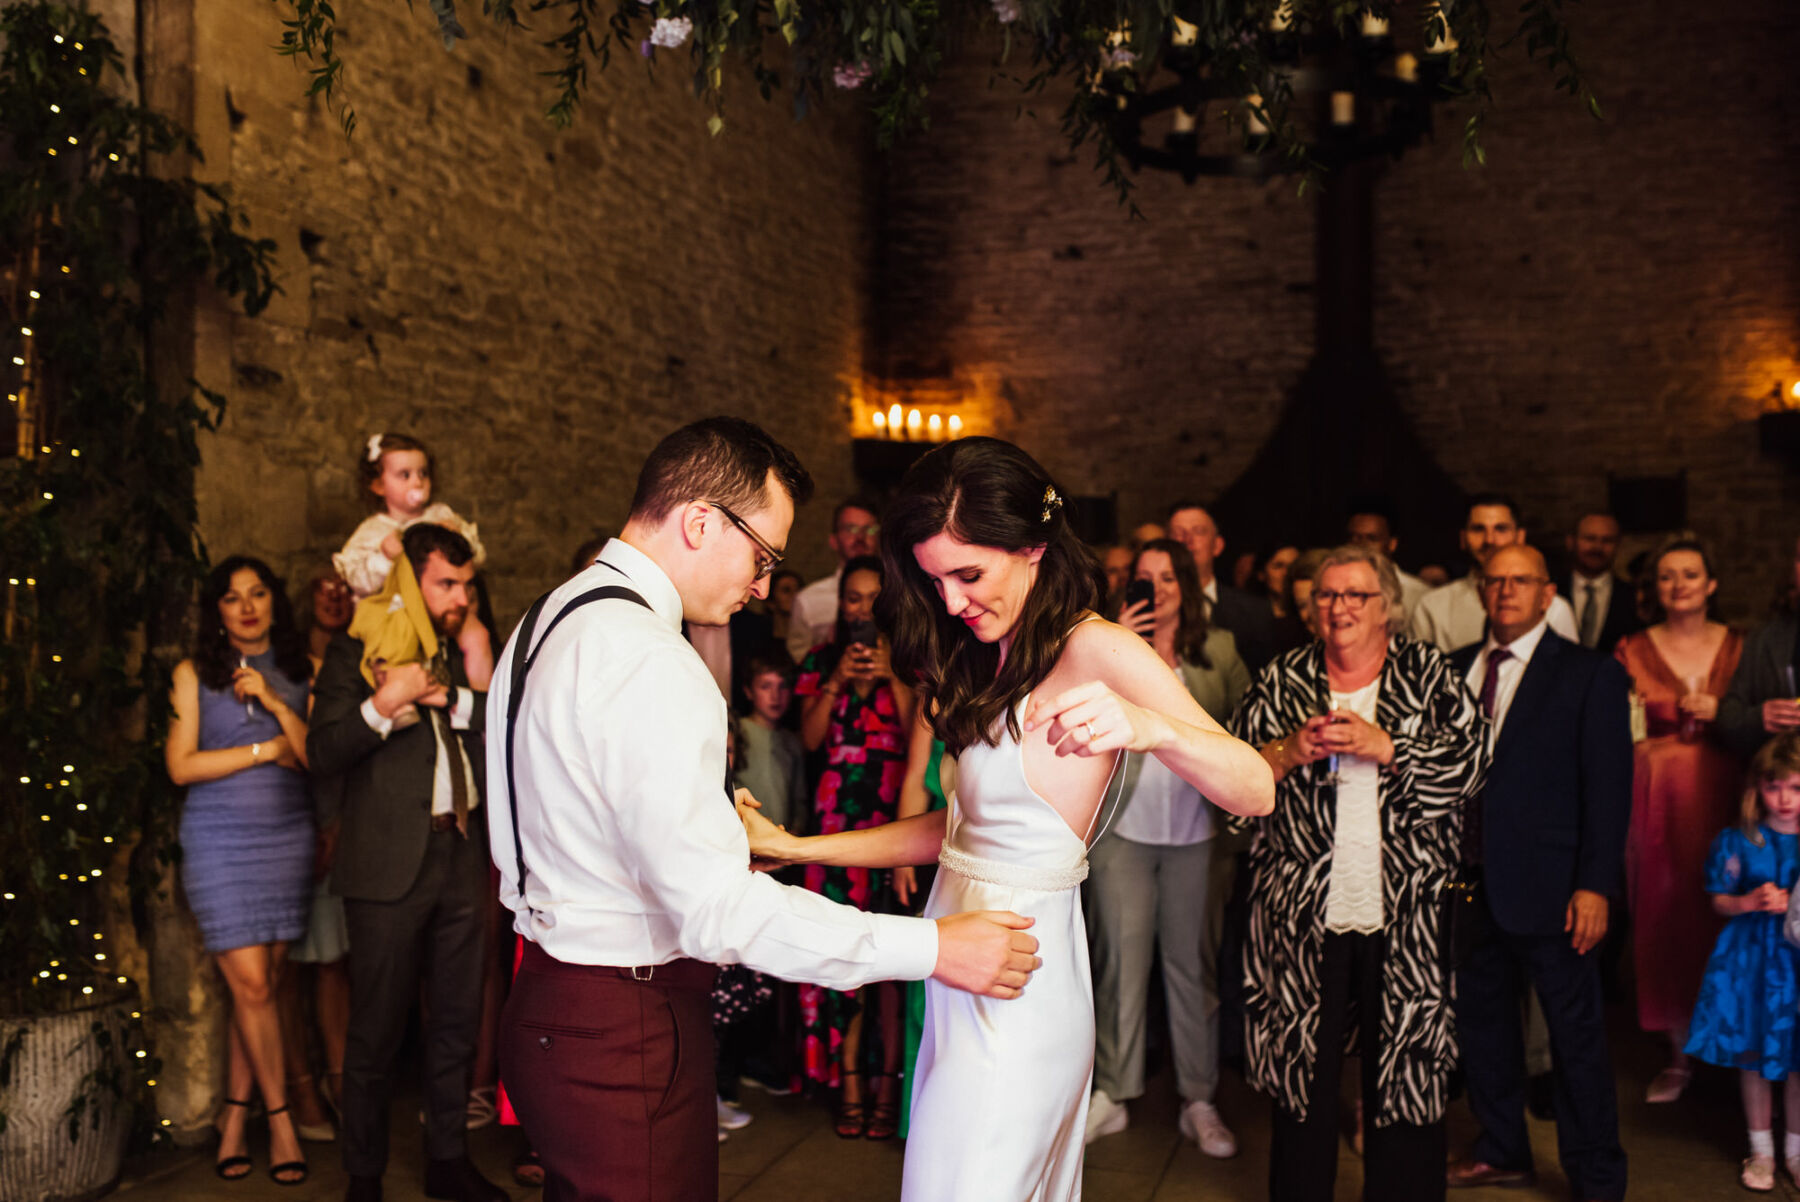 Andrea Hawkes bride on the dance floor at Stone Barn, in The Cotswolds. Michelle Woods Photography.